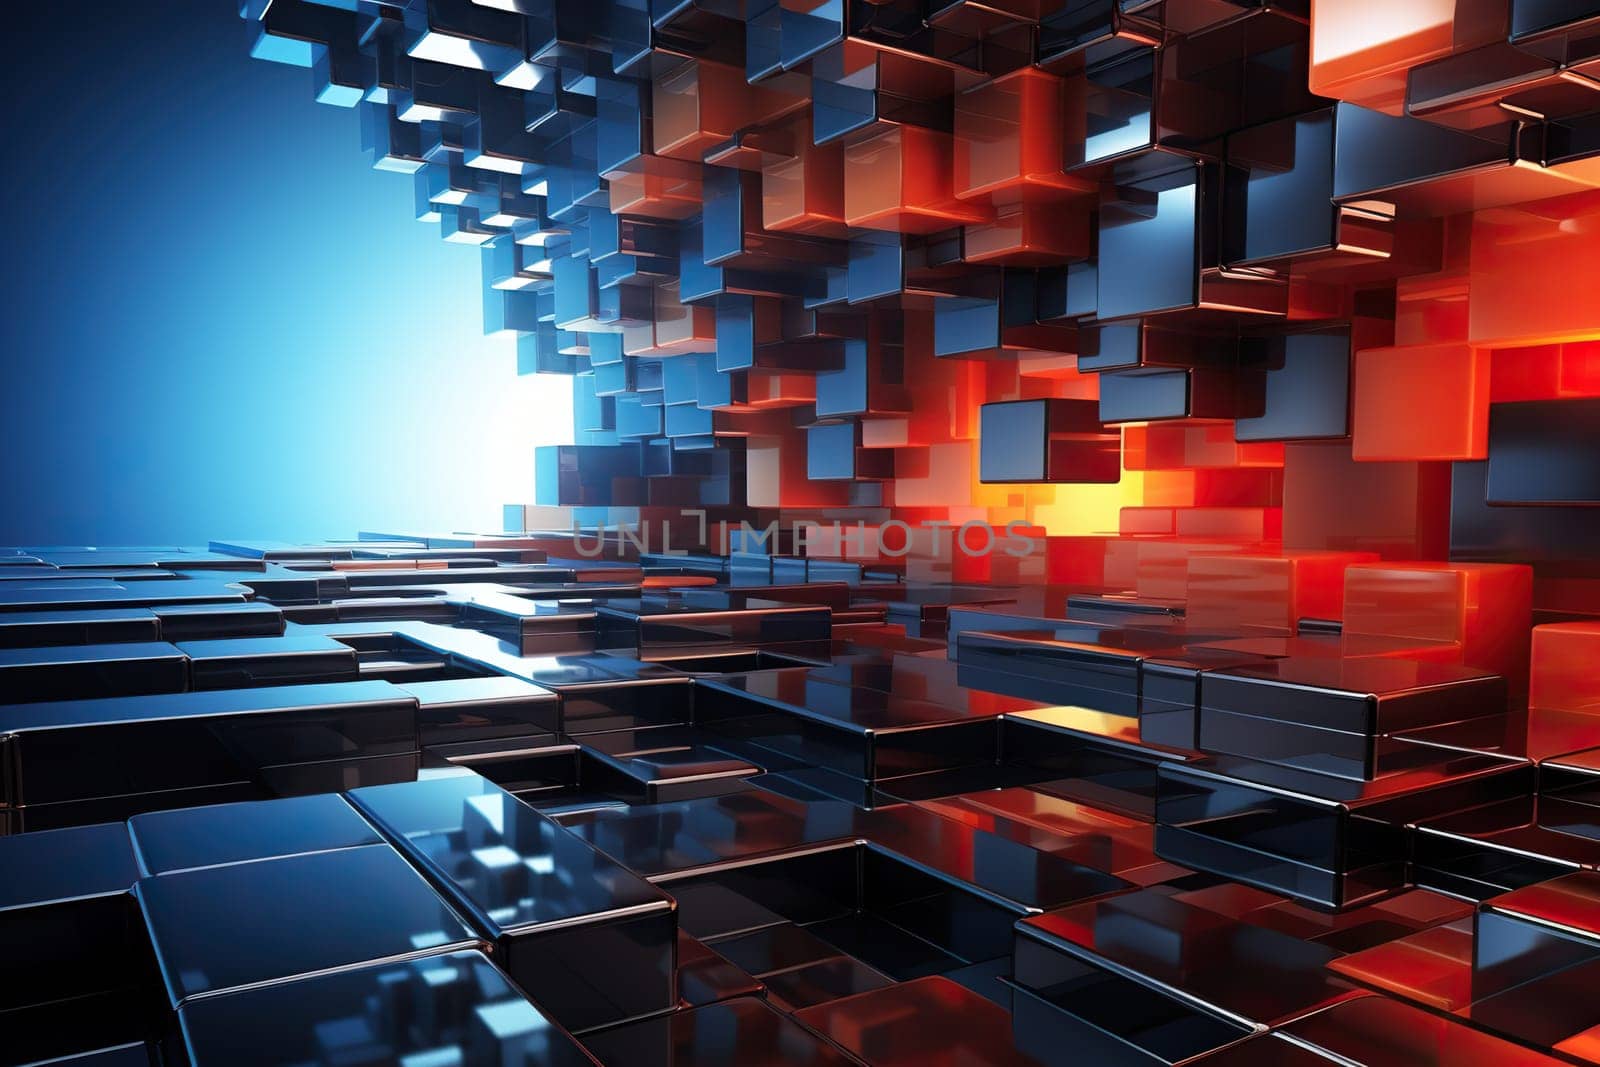 Abstract background image with cubes in blue and orange tones in space.